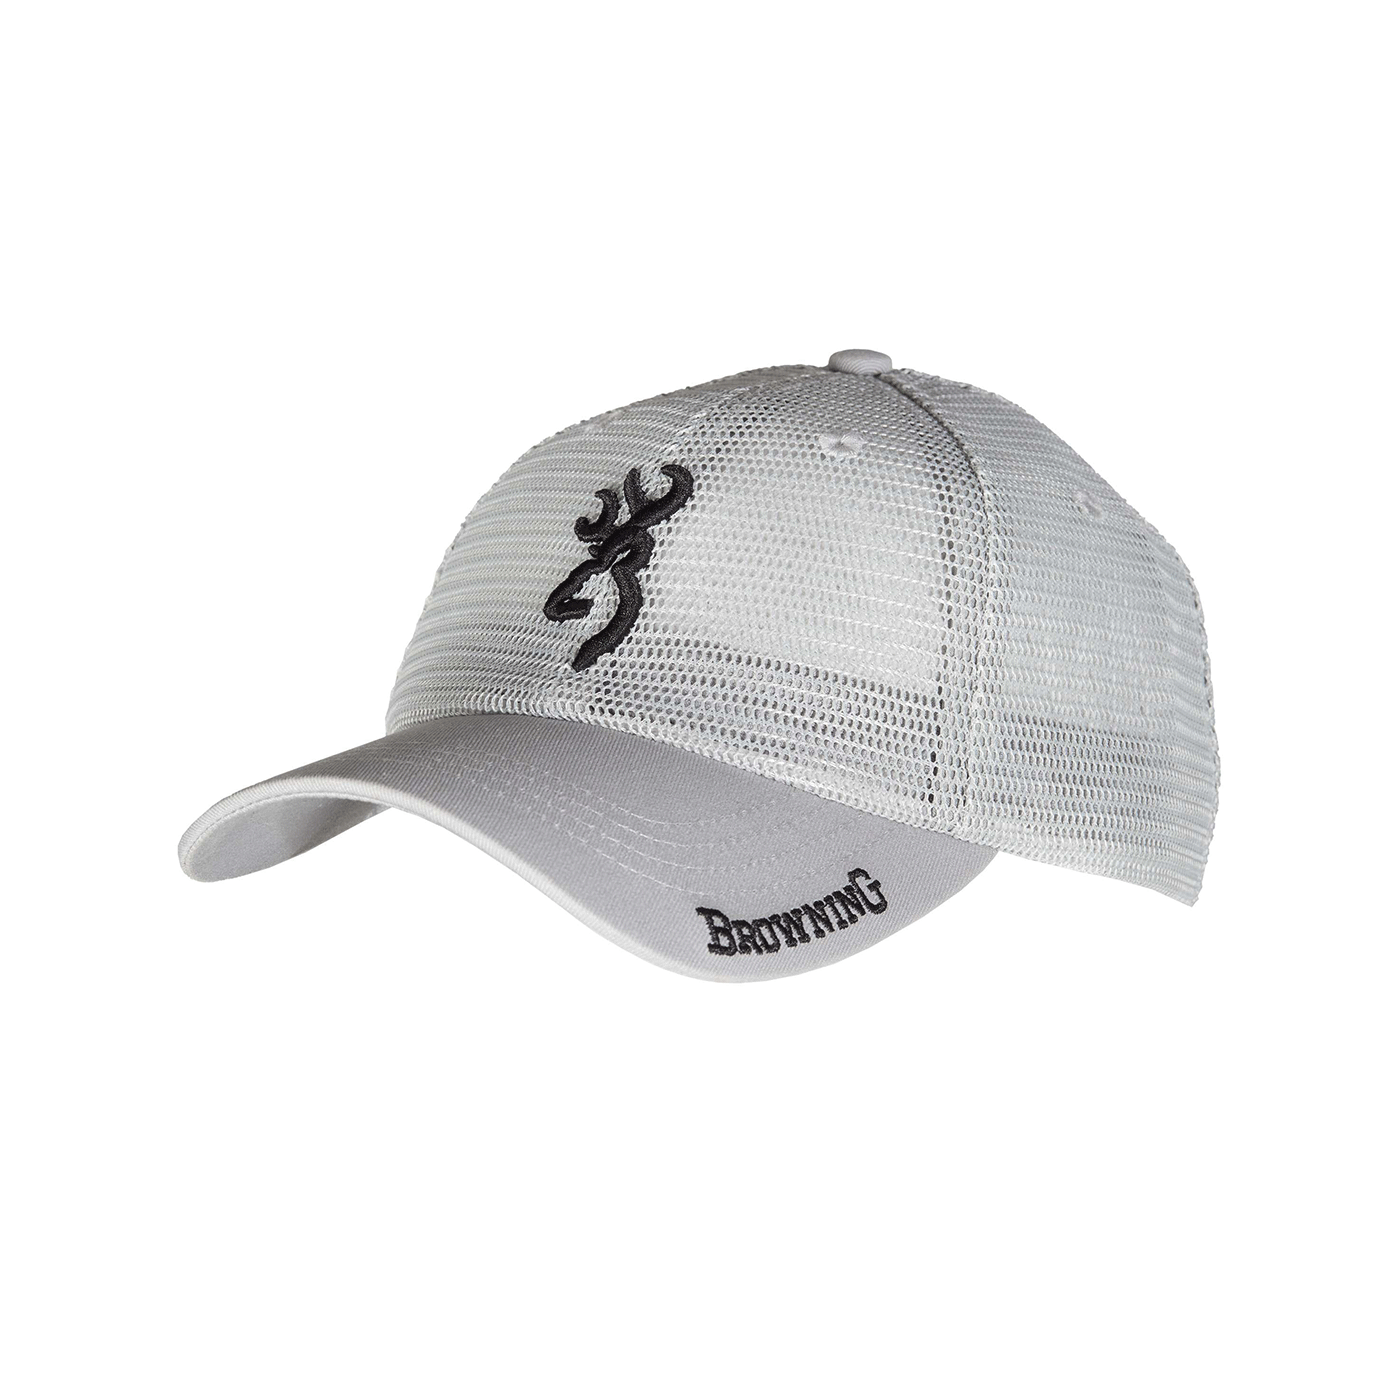 HAT - BROWNING - CAP TIME GRAY LIGHT